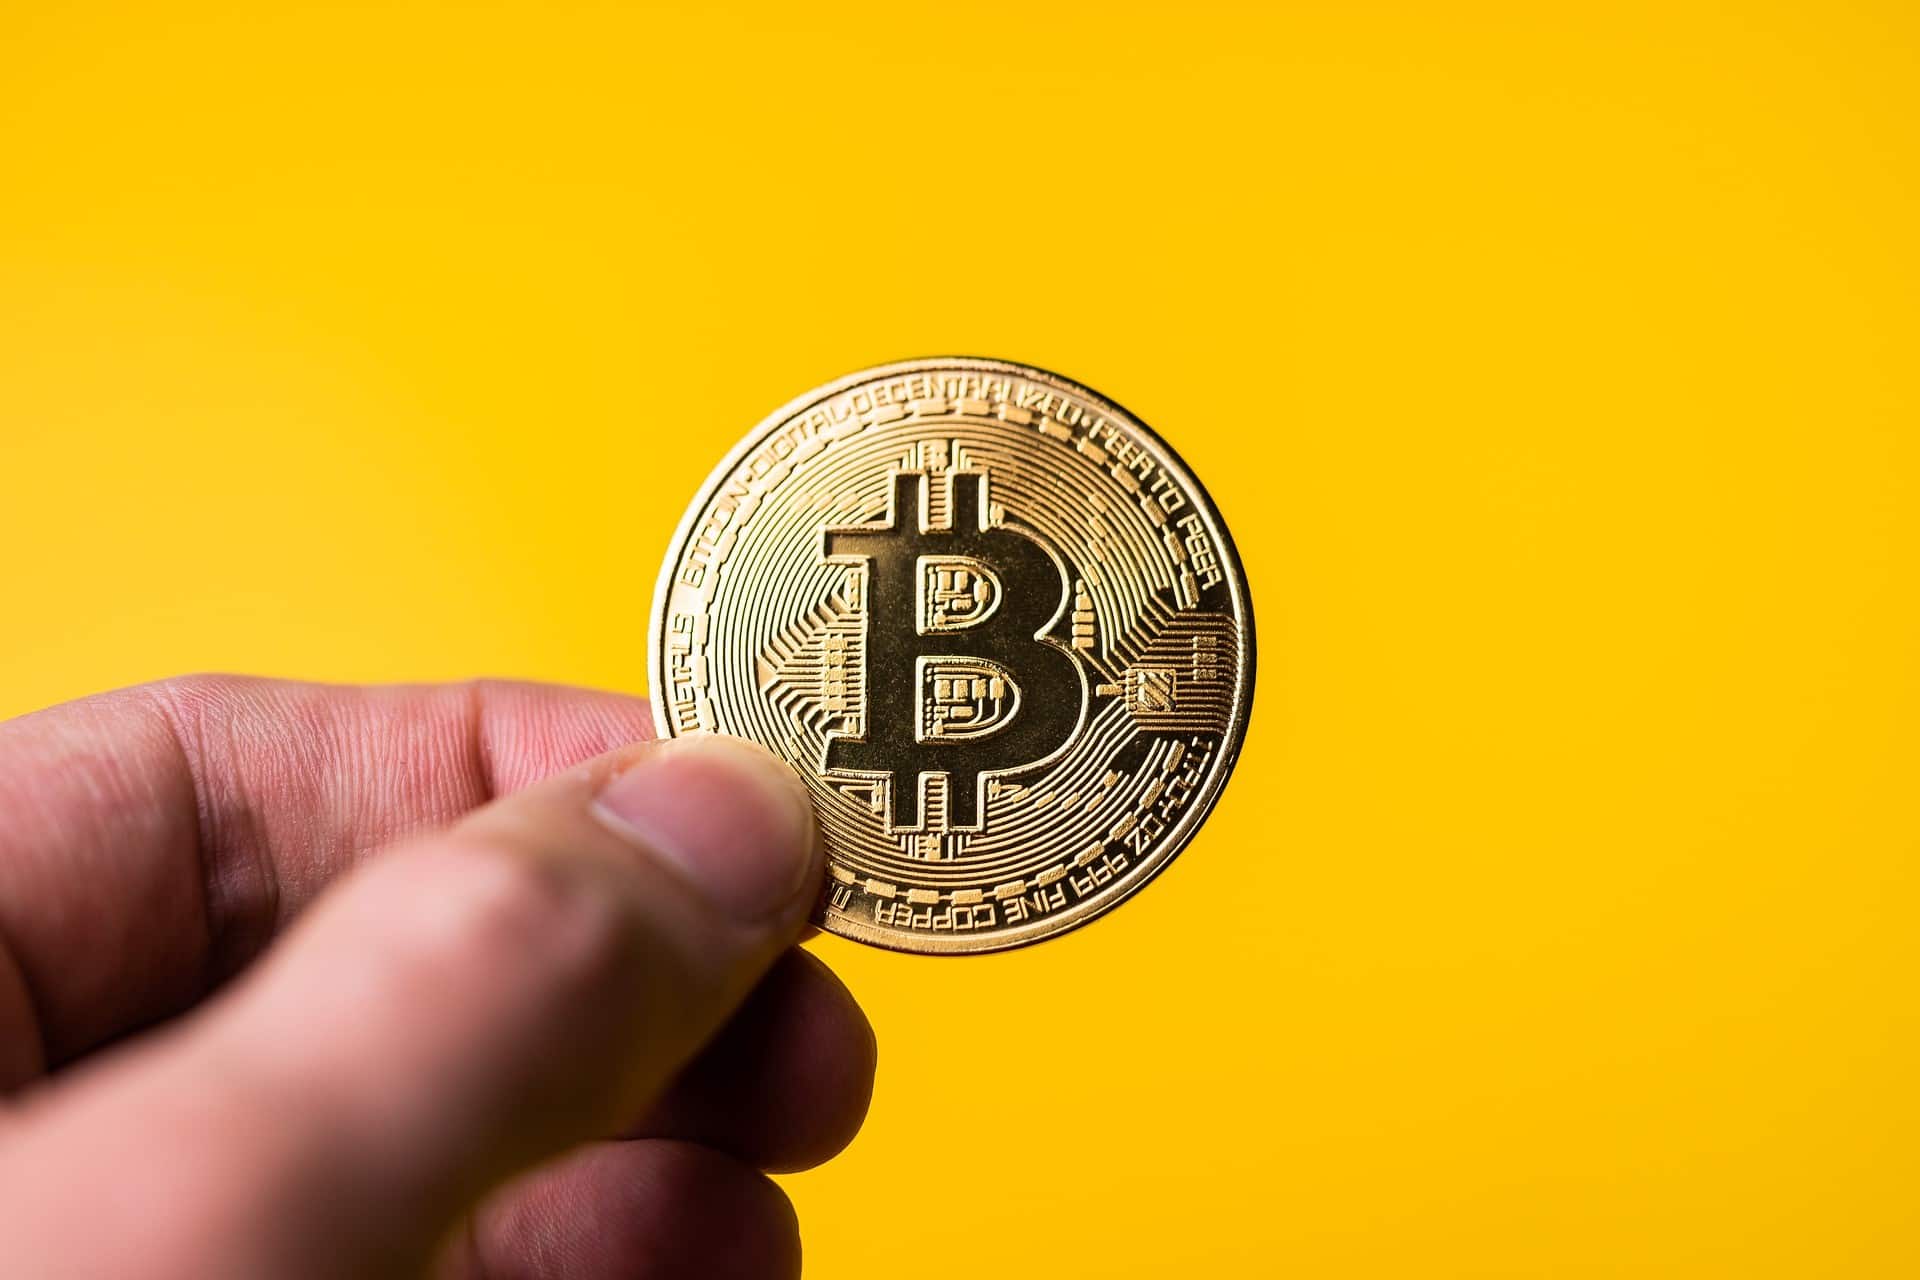 BTC Adoption to Grow over 50% by 2025, Report Claims